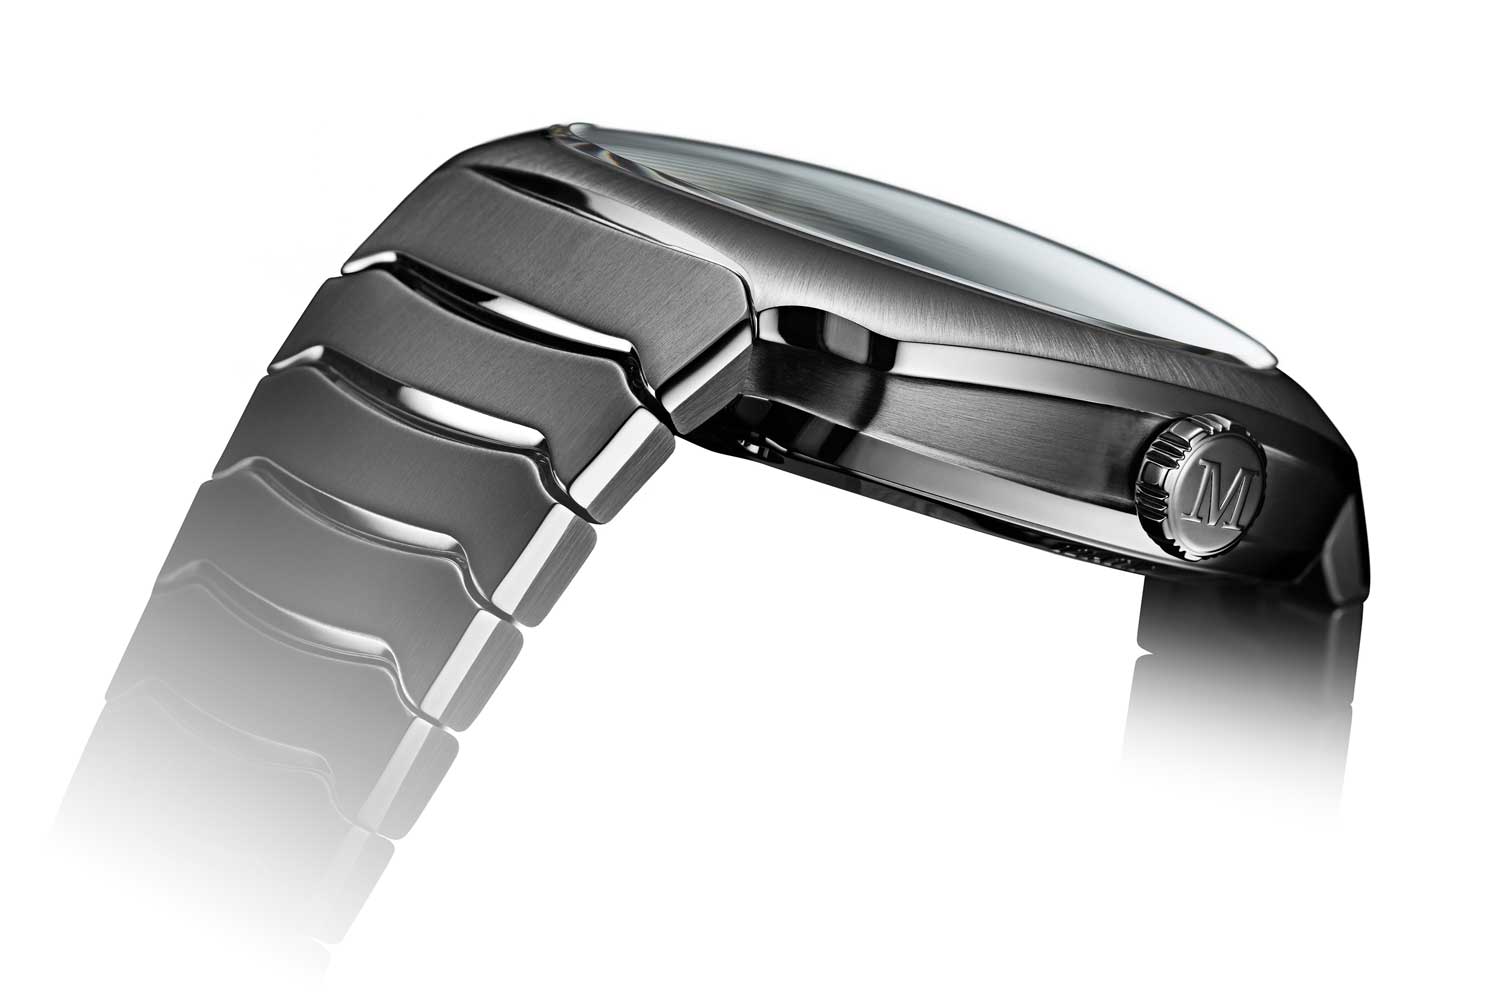 Like the segments of a lobster tail, the integrated stainless steel bracelet and case become one.